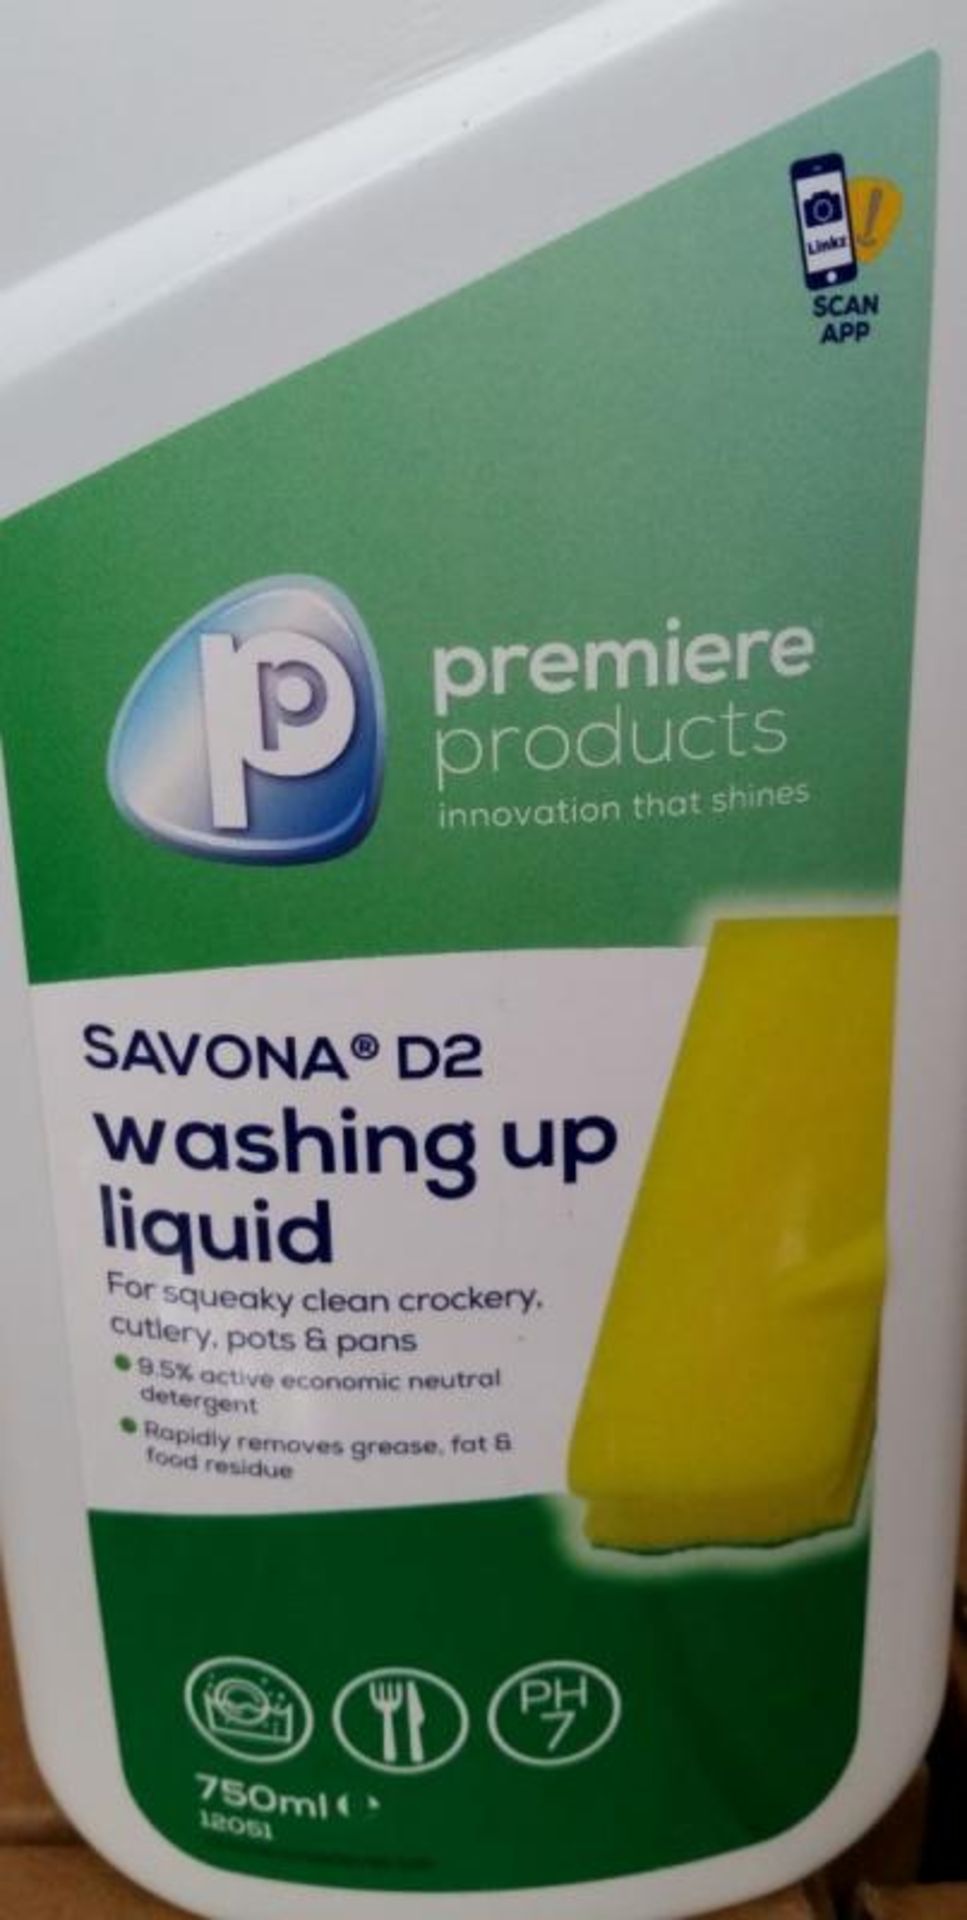 12 x Premiere Products 750ml Savona D2 Washing Up Liquid - For Squeaky Clean Crockery, Cutlery, Pots - Image 5 of 6